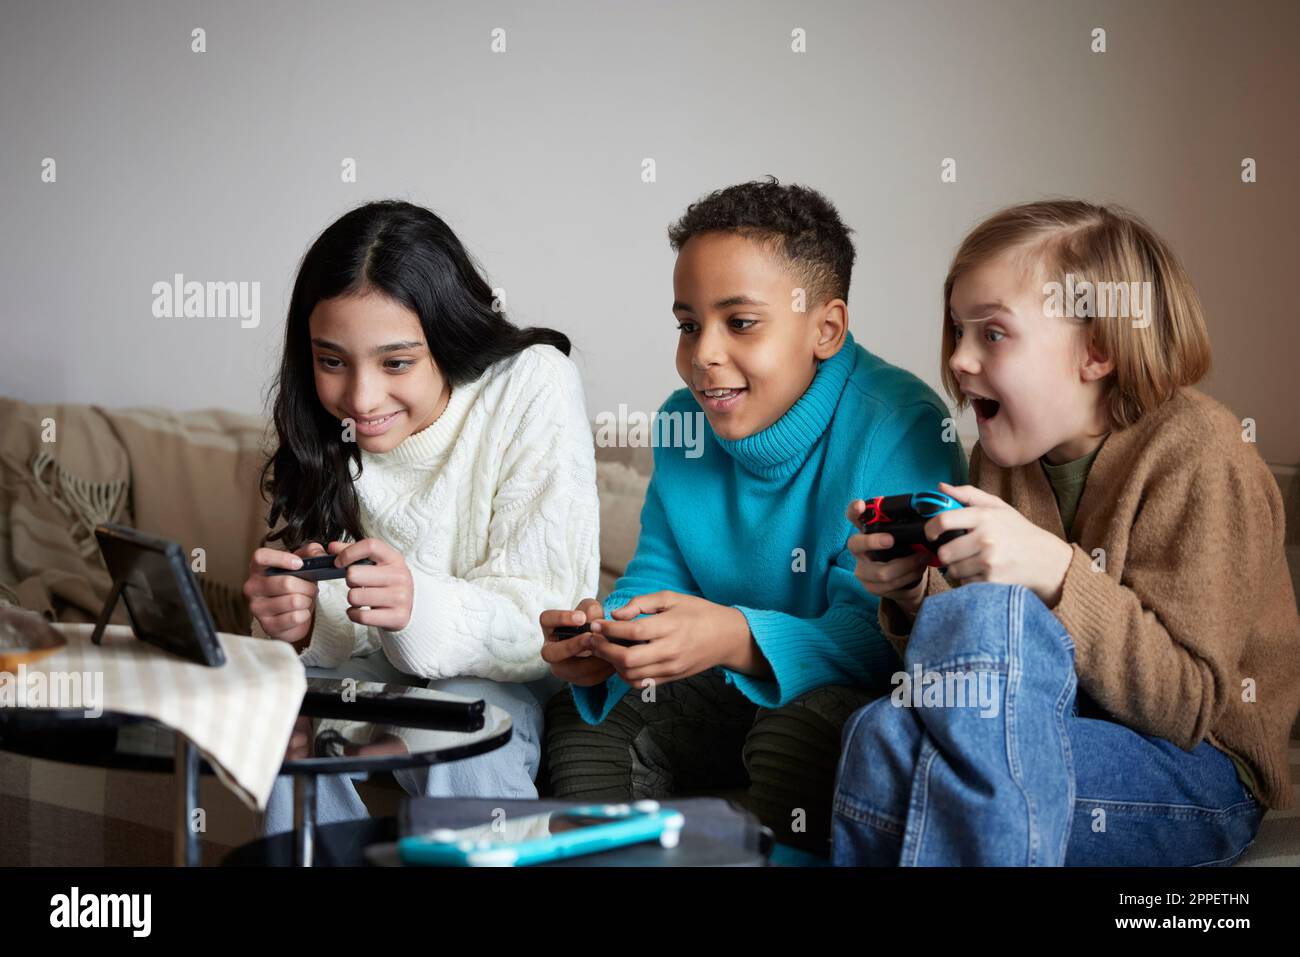 Children playing video games at home Stock Photo